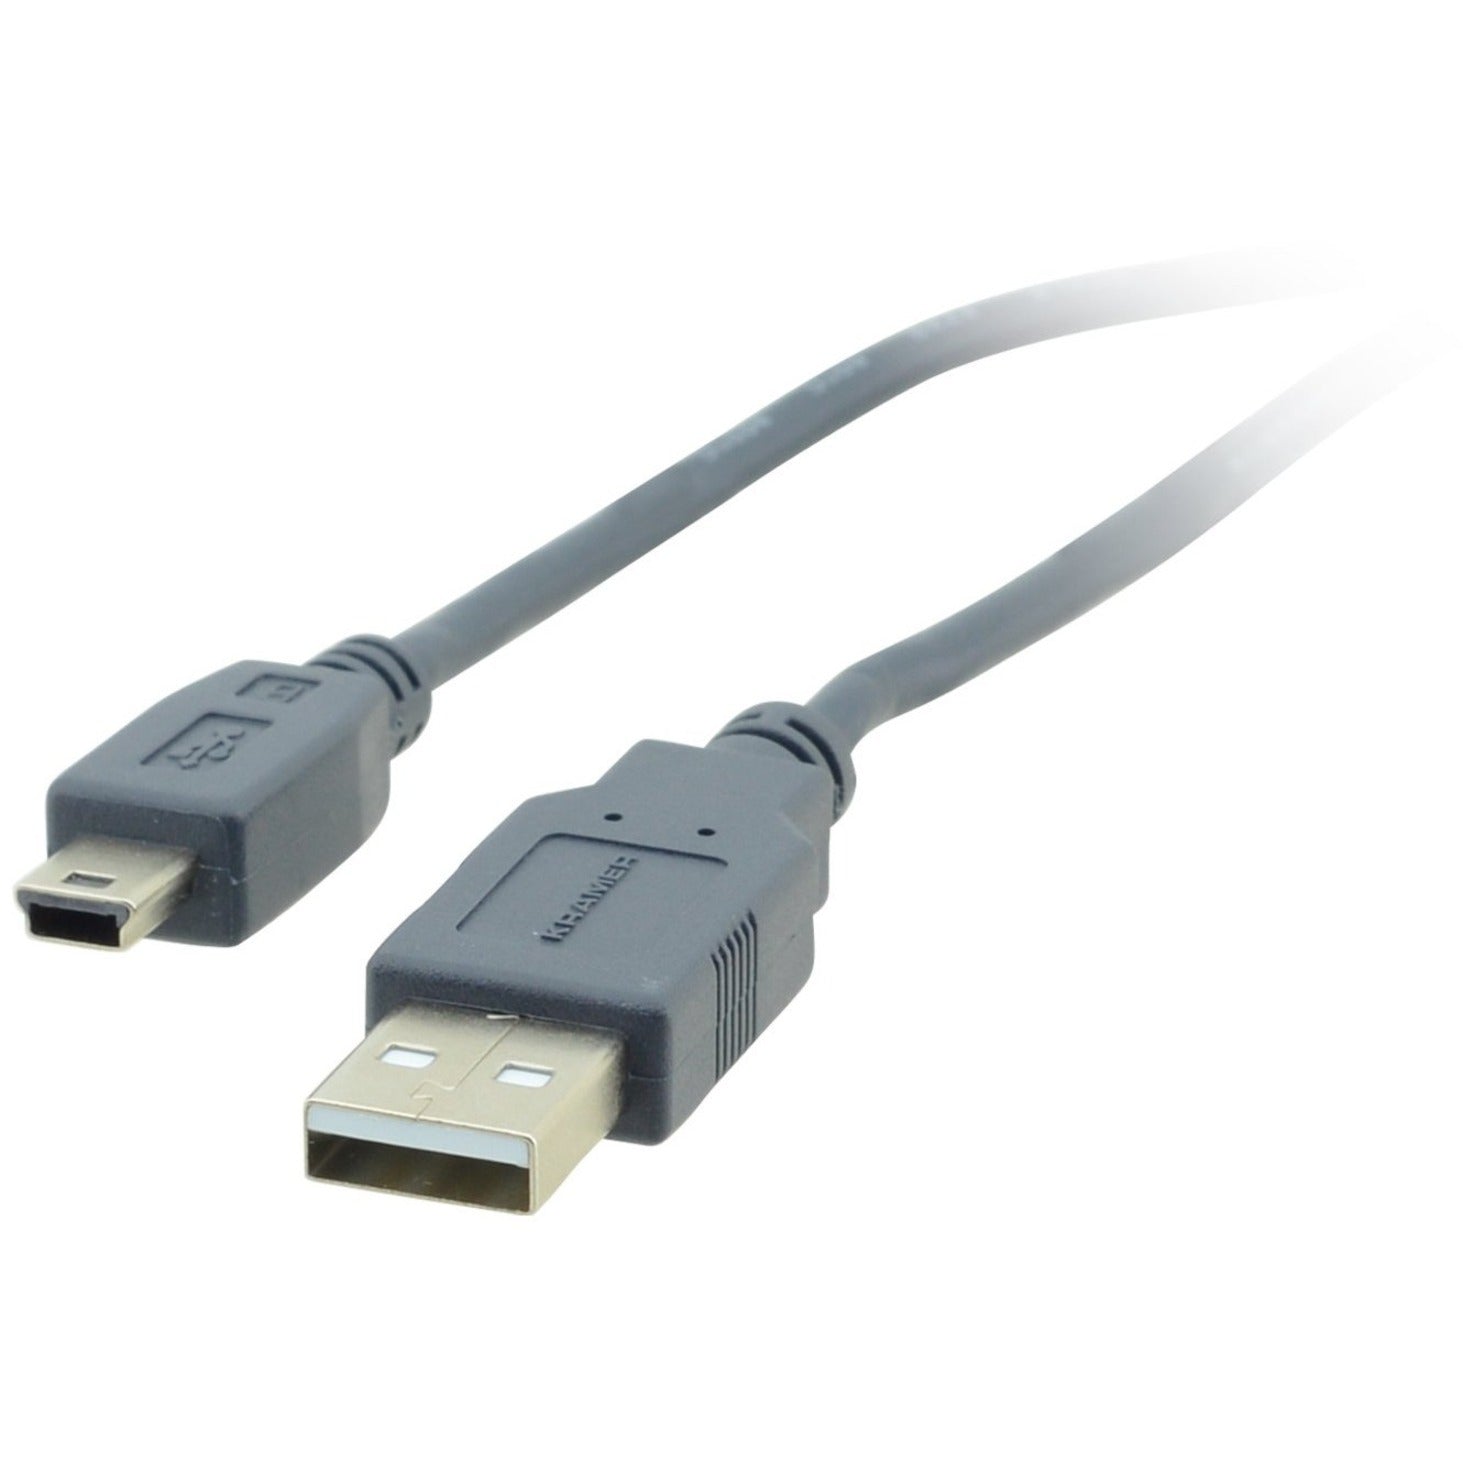 Kramer 96-02155015 USB 2.0 A to Mini-B 4-pin Cable, 15.09 ft, EMI/RF Protection, Molded, Strain Relief